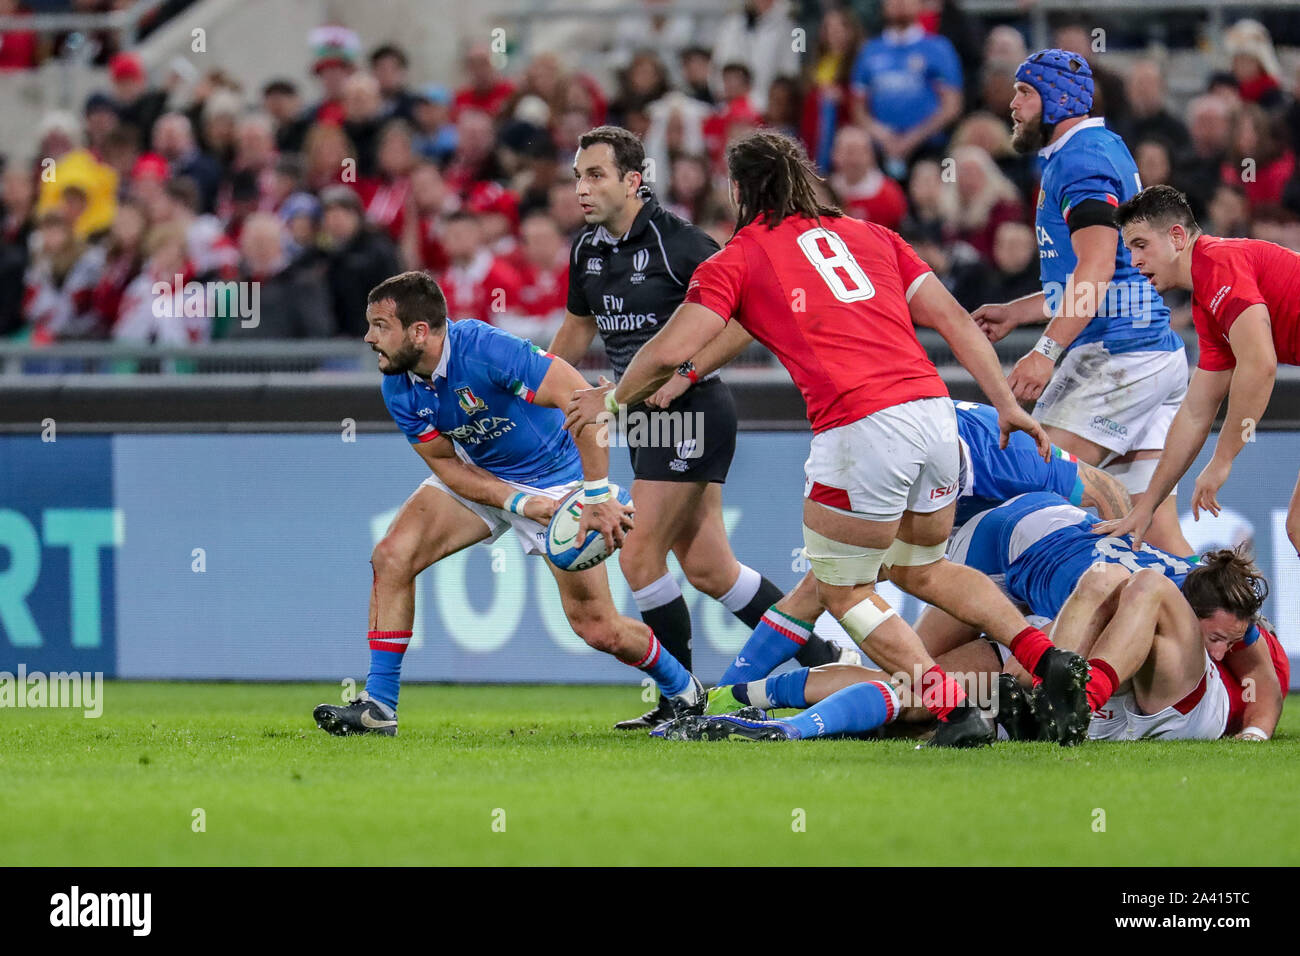 dalla ruck guglielmo palazzani  during Guinness Six Nations Rugby - Italy vs Galless, Rome, Italy, 09 Feb 2019, Rugby Italian Rugby National Team Stock Photo